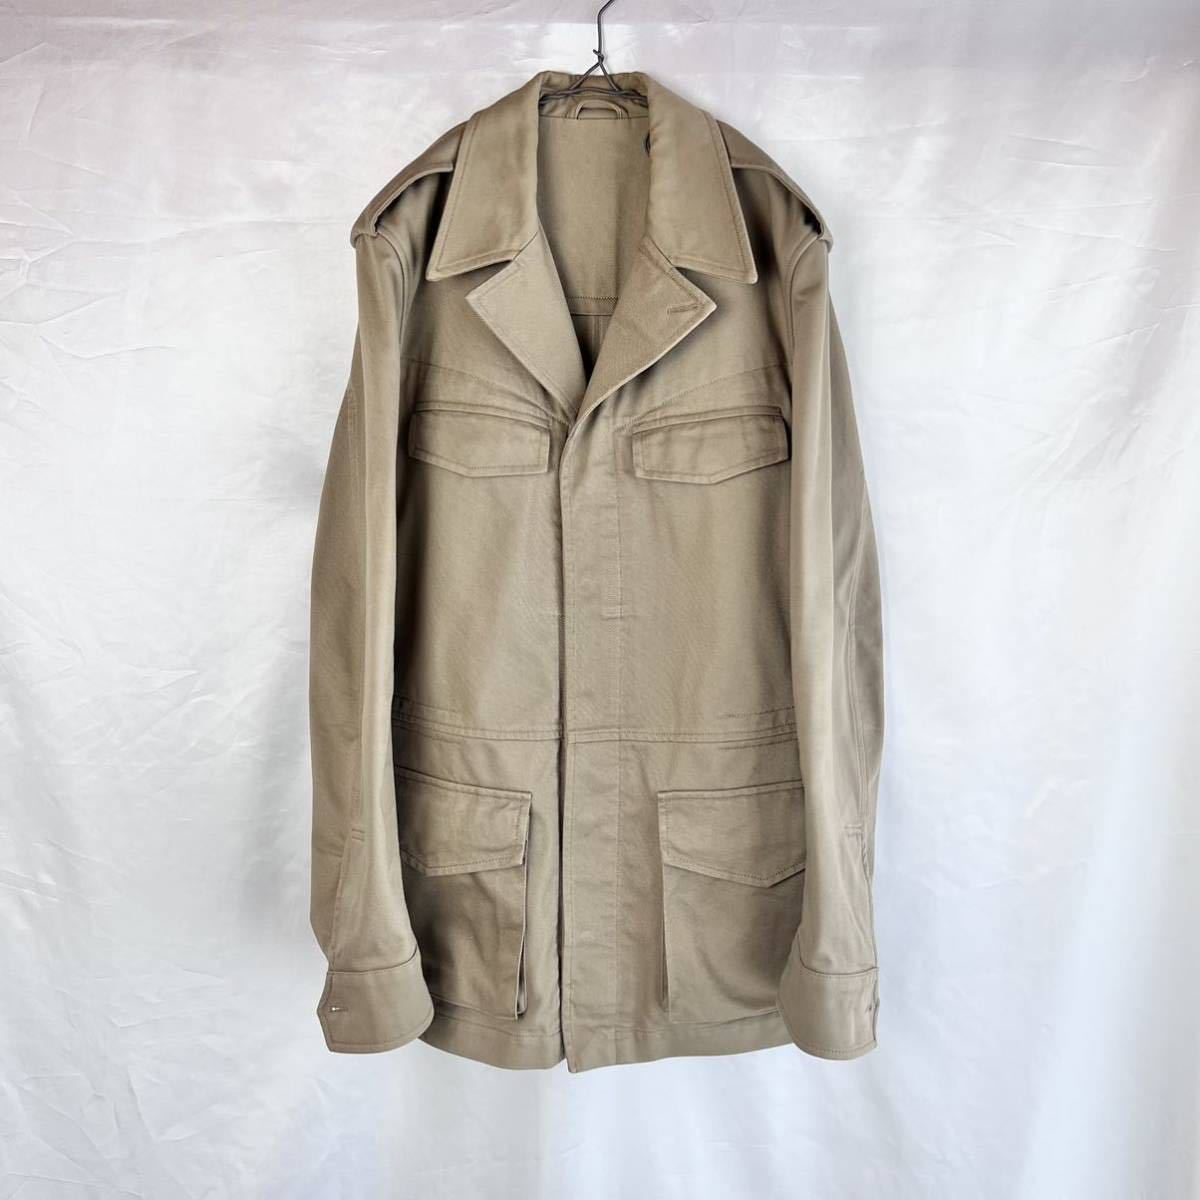 2000s Gucci by Tom Ford M-65 Militaly Field Jacket グッチ M65 ミリタリー ワーク フィールド ジャケット ヴィンテージ トムフォード